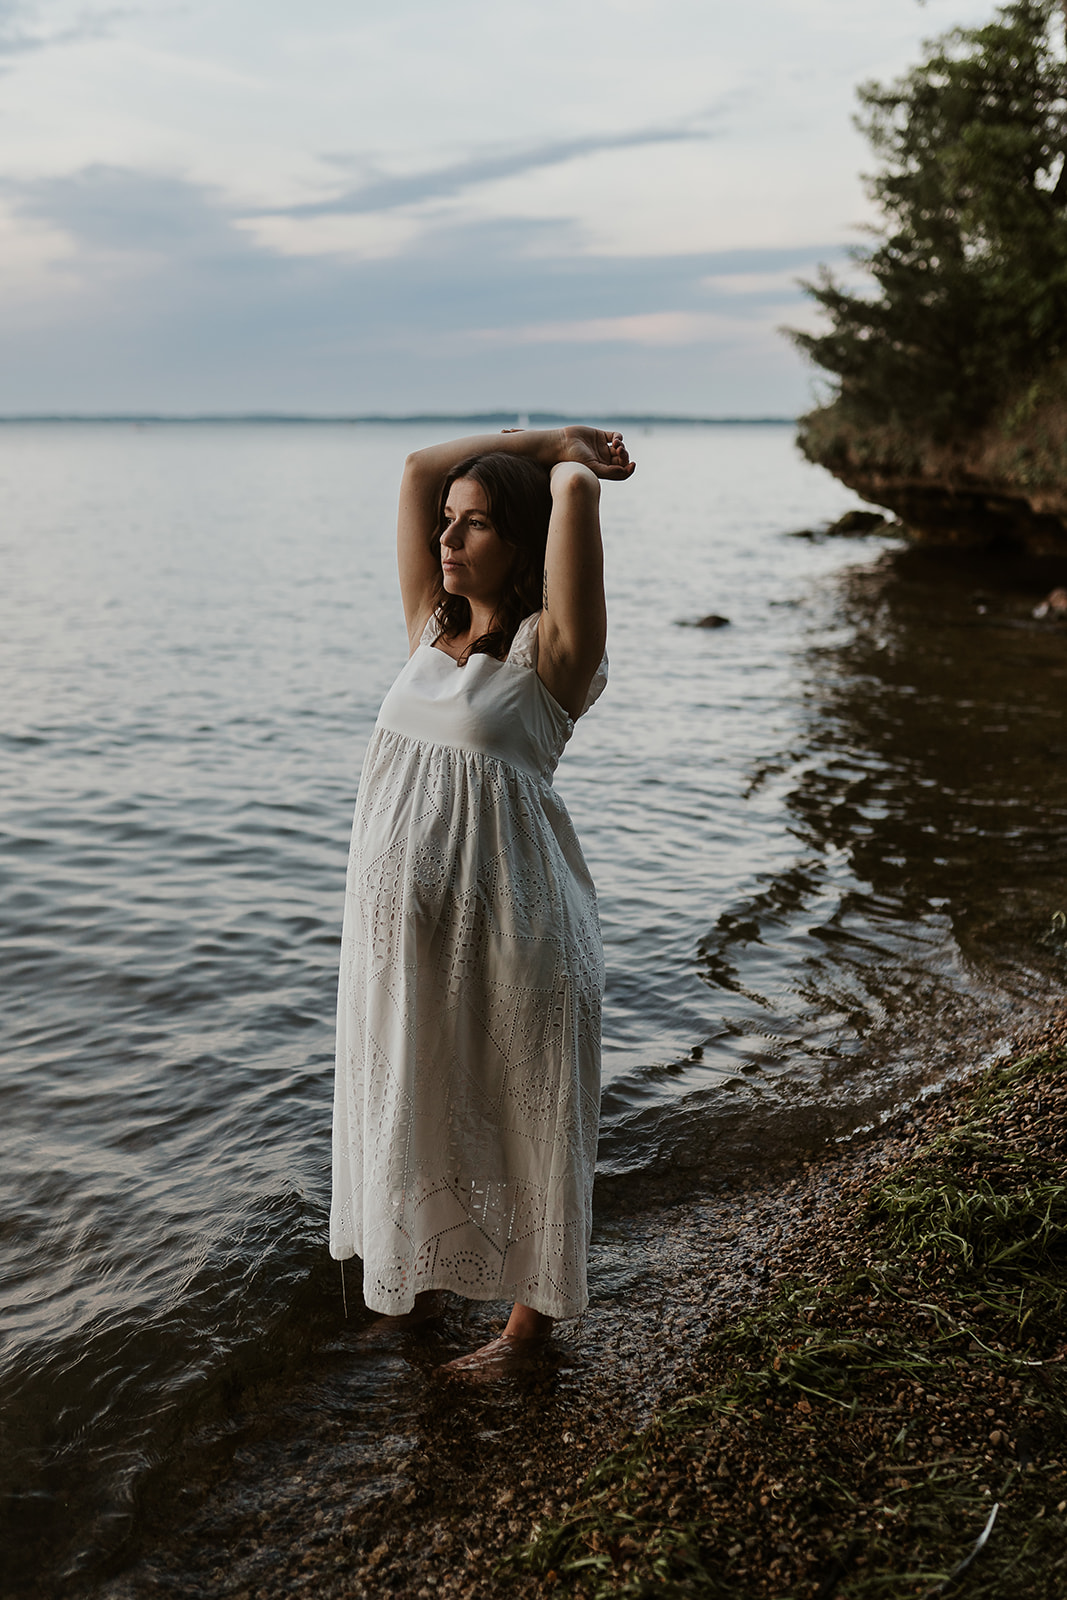 Pregnant mother in a white dress standing in the lakeshore water after sunset